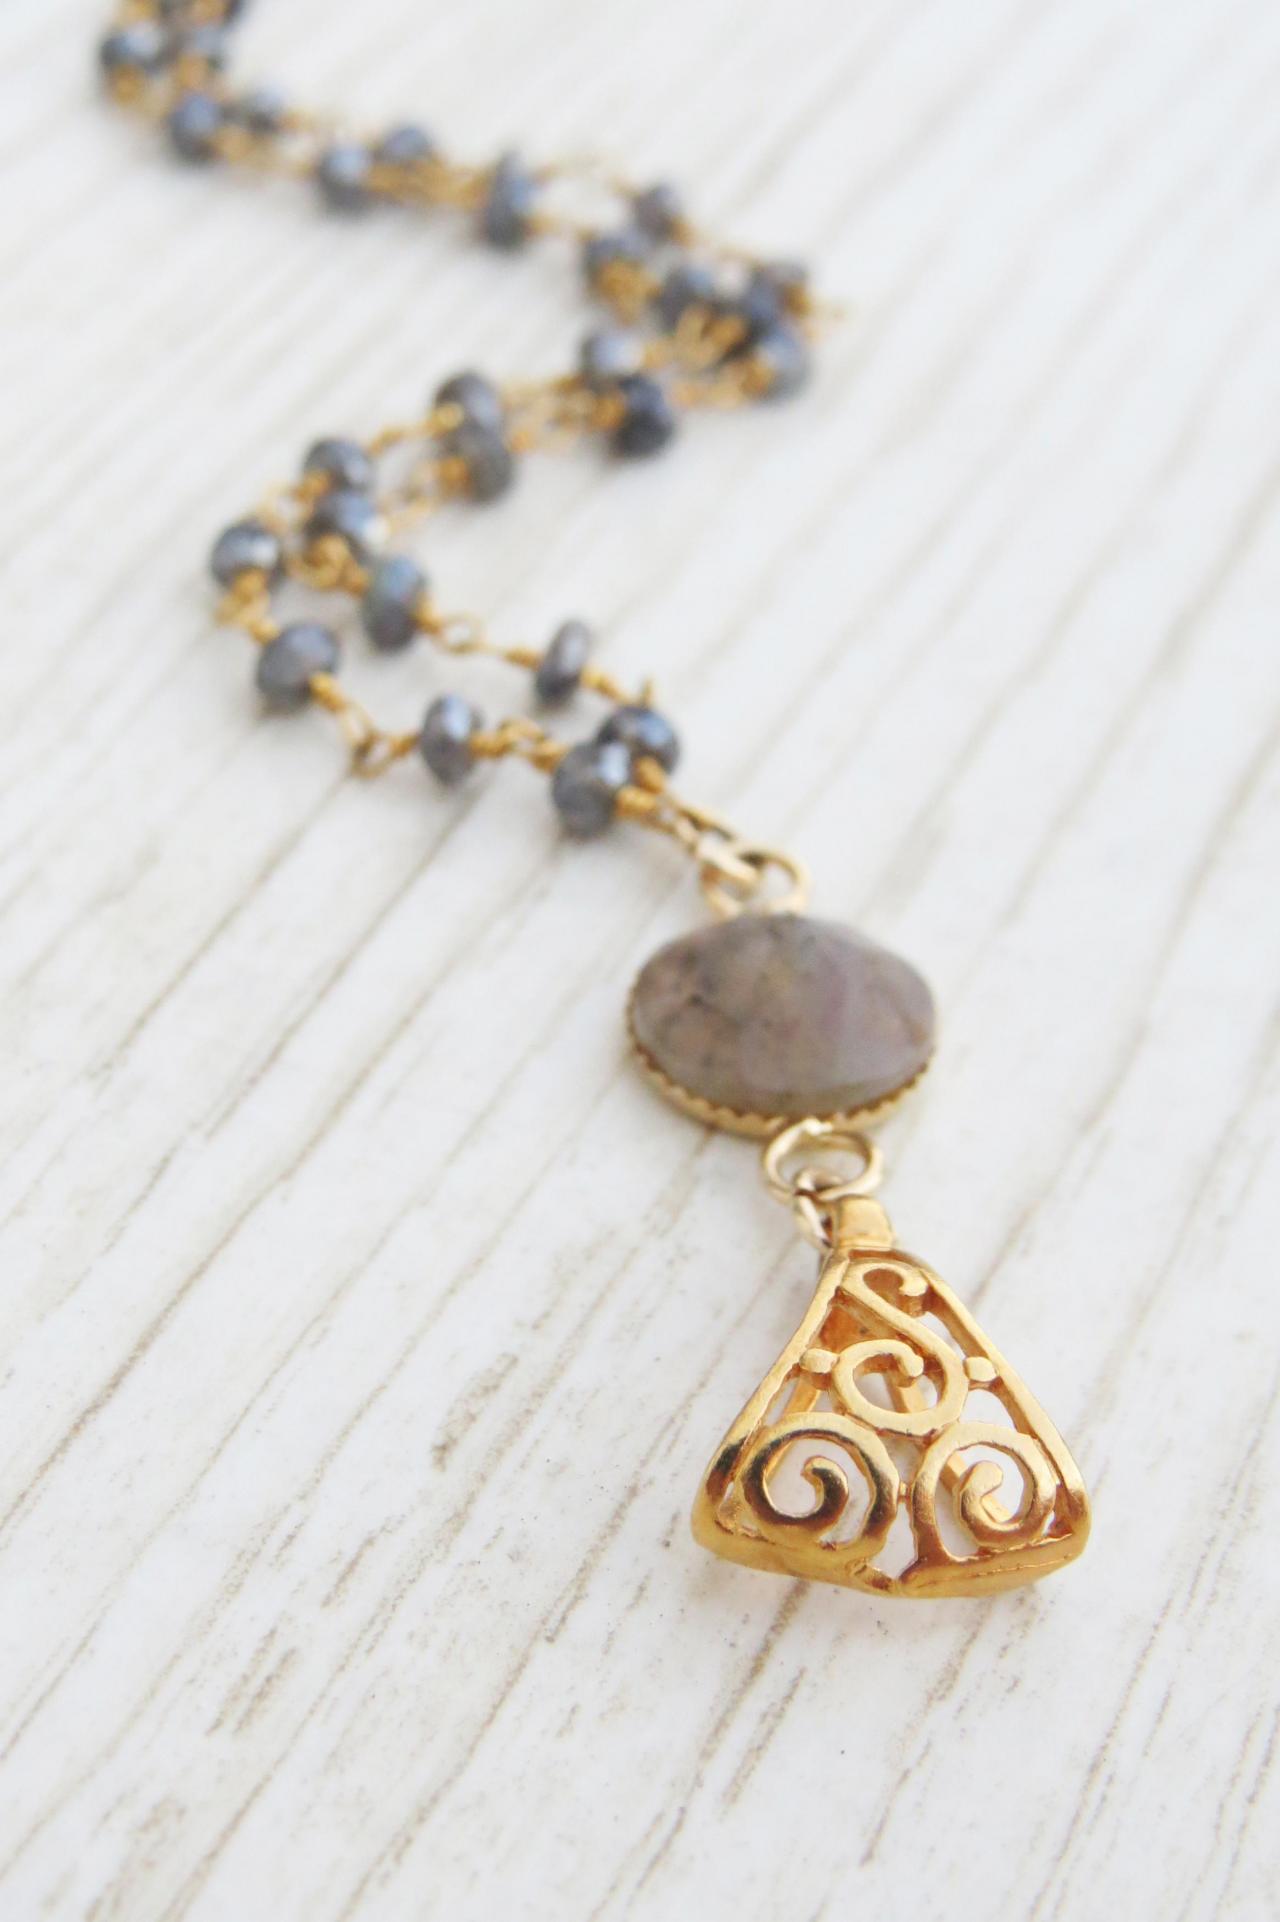 Gold Long Necklace, Labradorite Necklace, Gemstone Necklace, Layer Necklace, Bridesmaid Gift, Delicate Gold Necklace